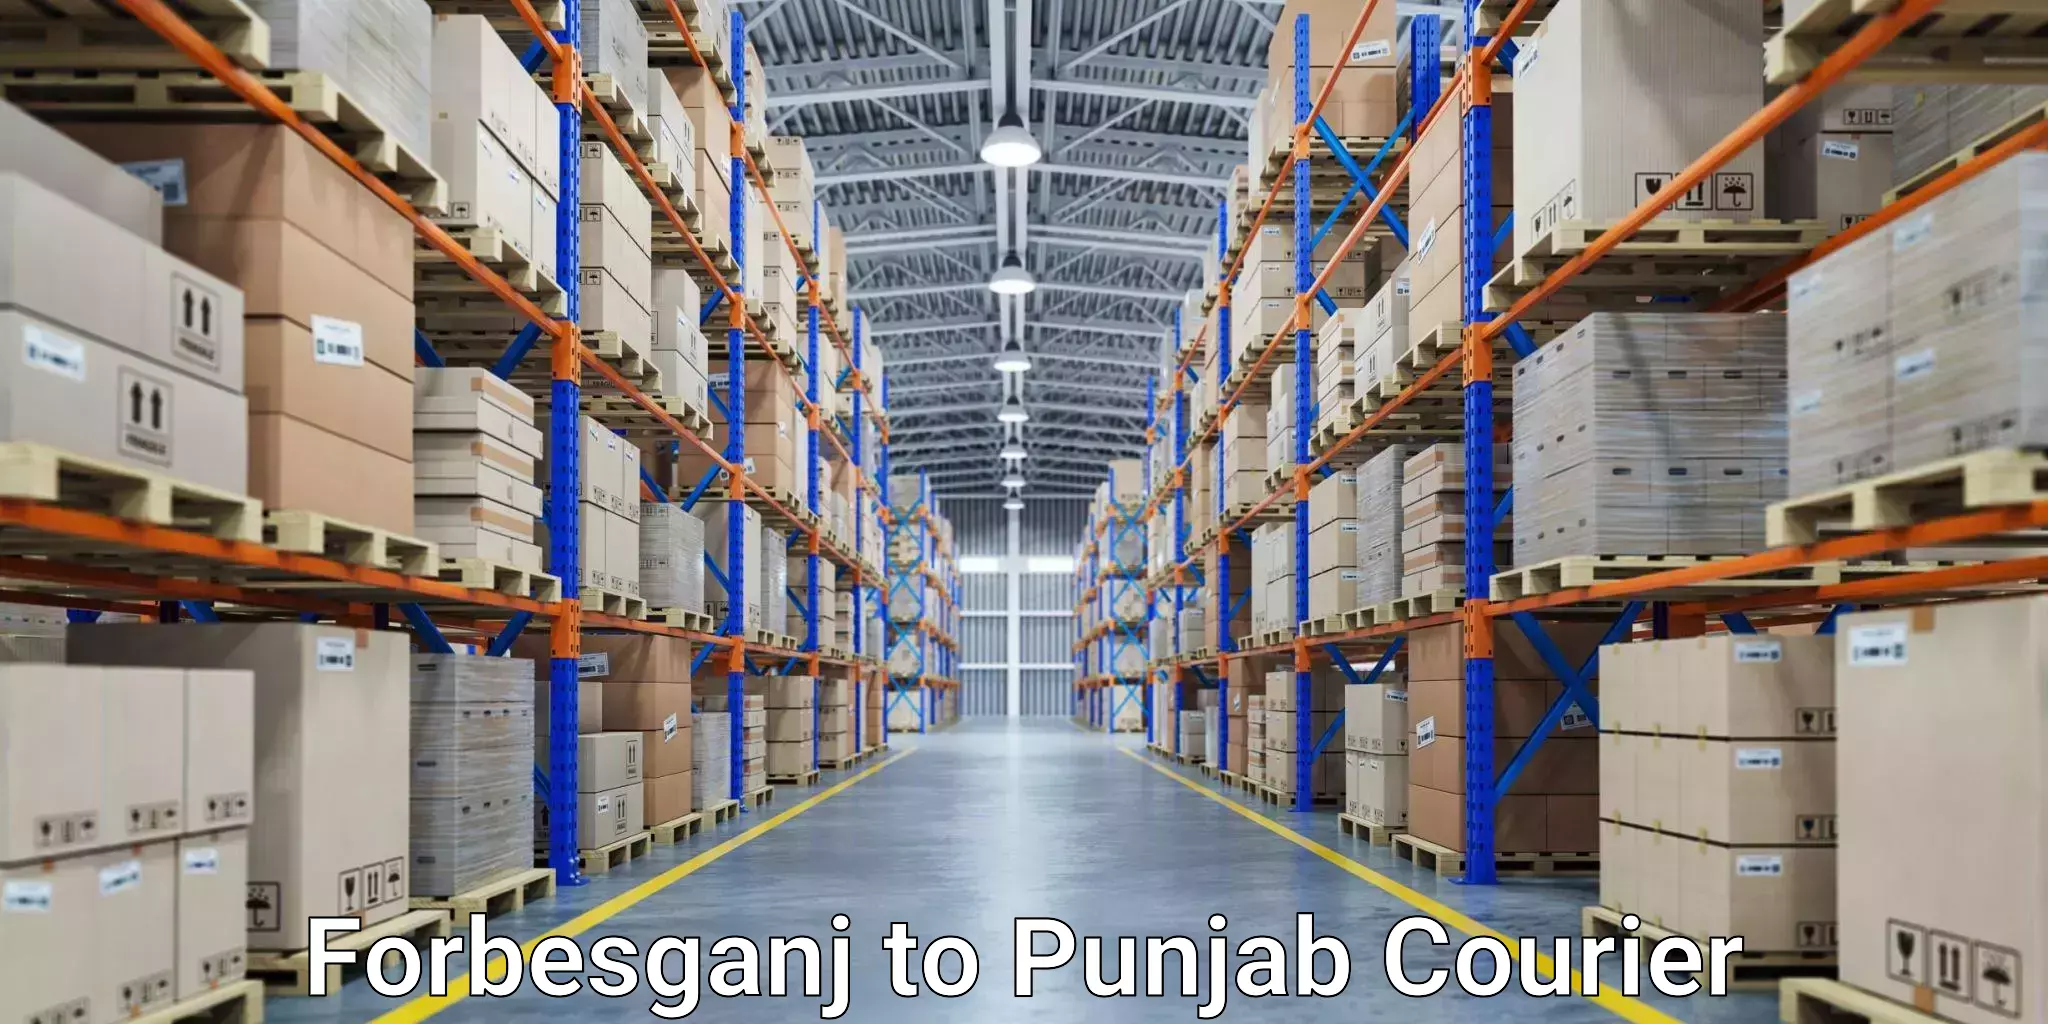 Express delivery capabilities in Forbesganj to Mohali